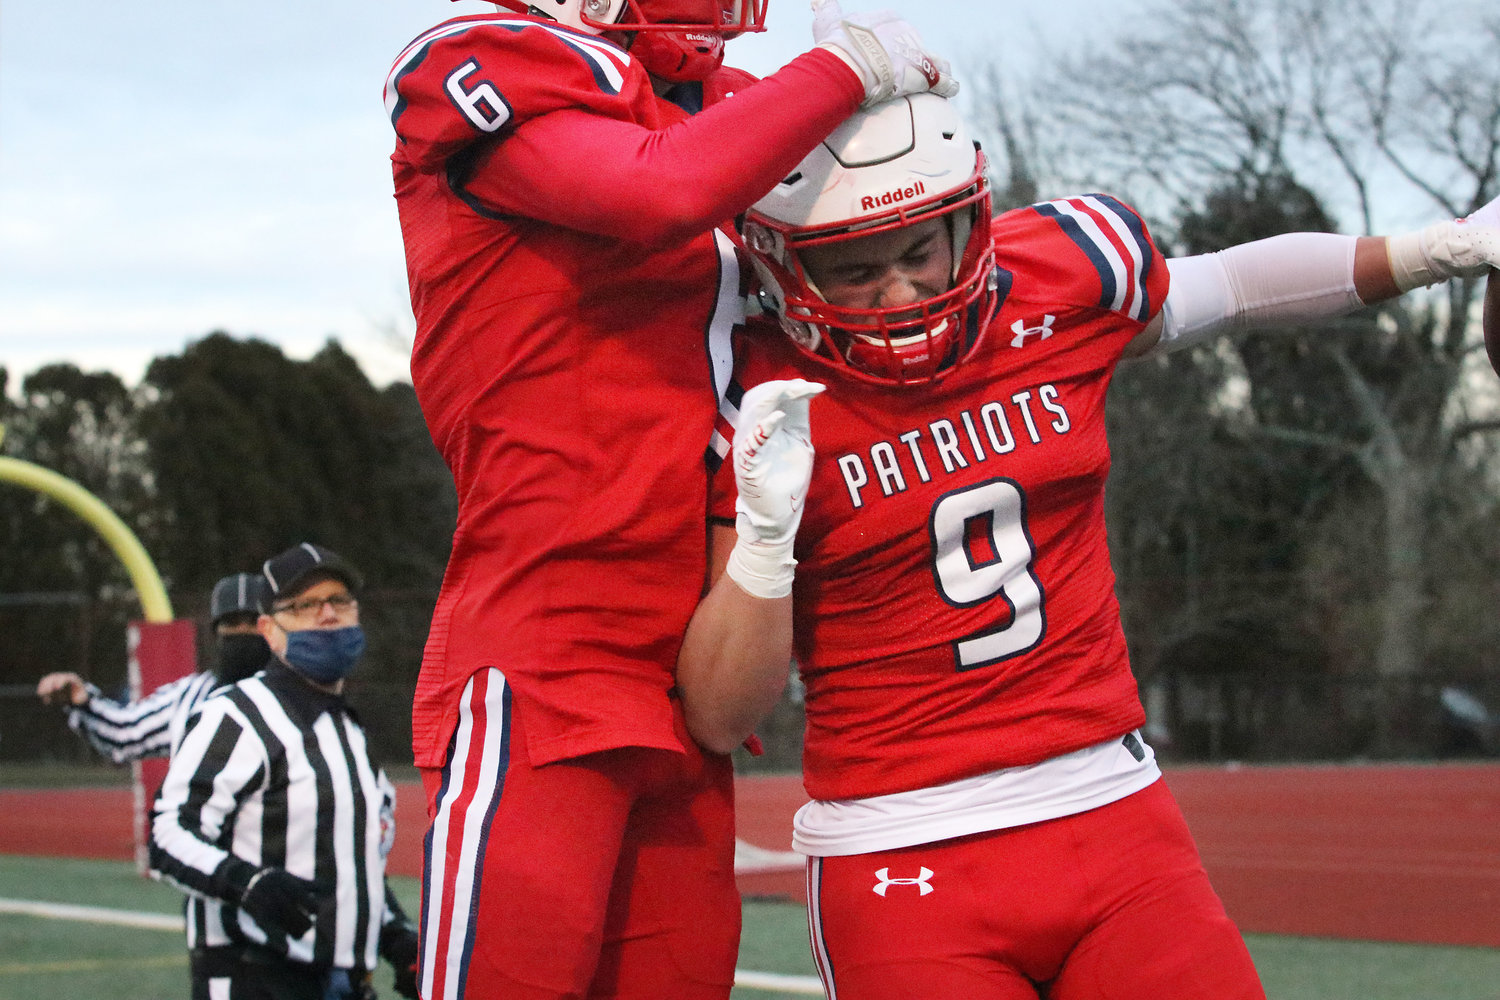 Marcus Evans (left) celebrates with Chris Bulk after the latter’s TD catch in the second period.